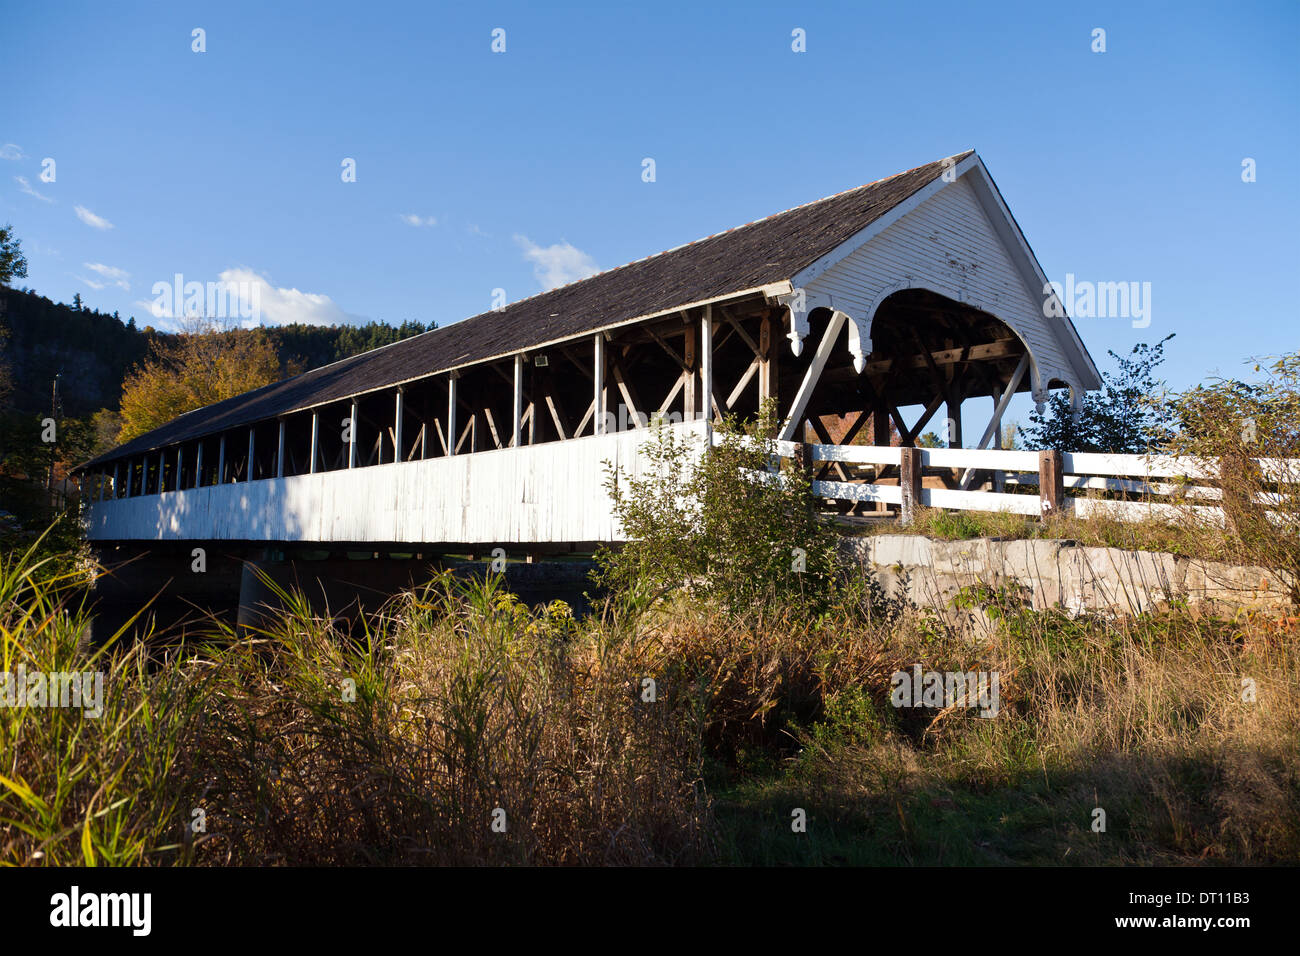 Popular with artists, the Stark covered bridge dates from 1862 and crosses the Ammonoosuc River, Stark, New Hampshire. Stock Photo